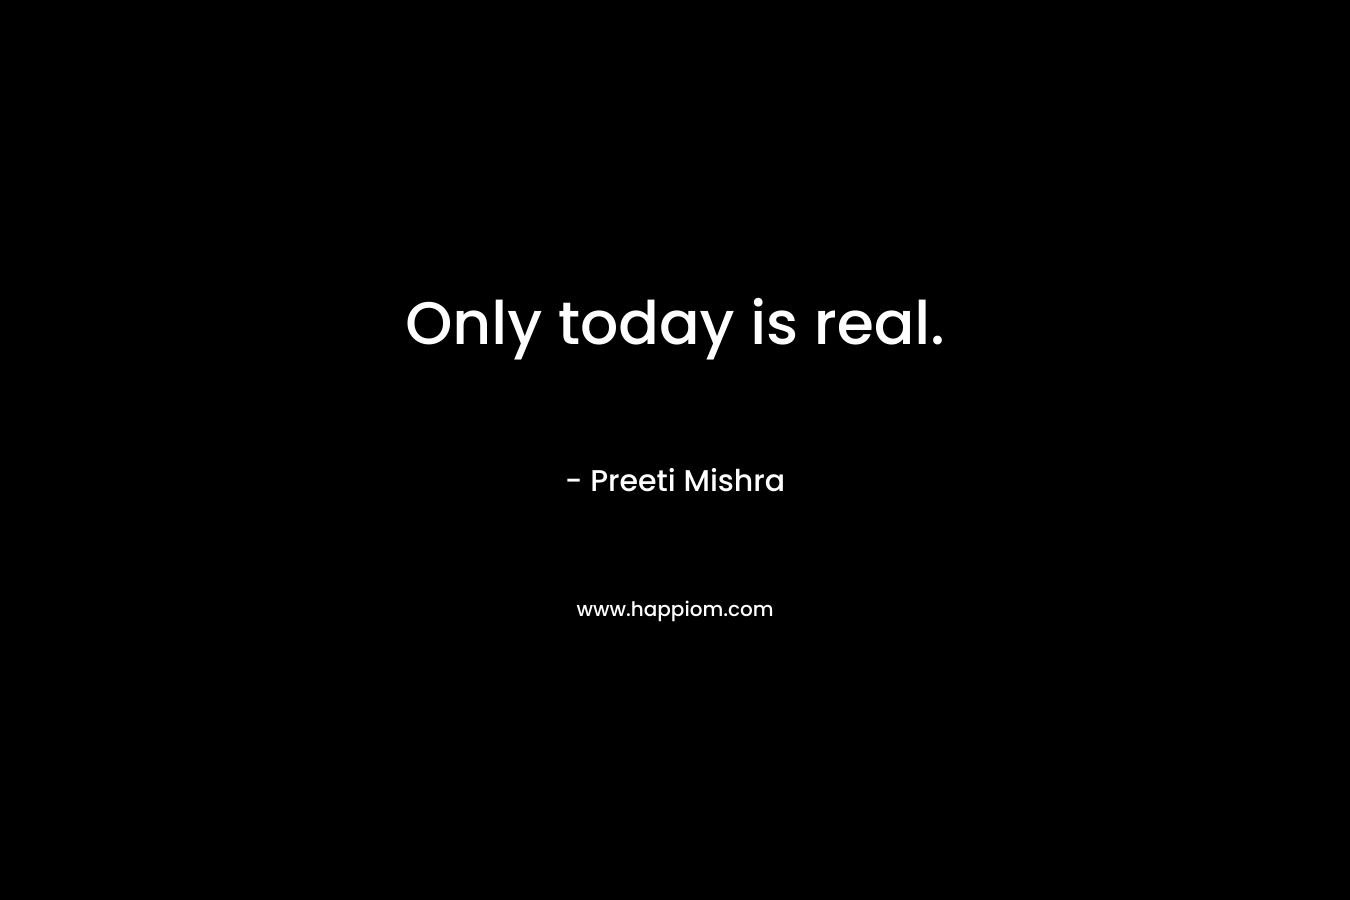 Only today is real.